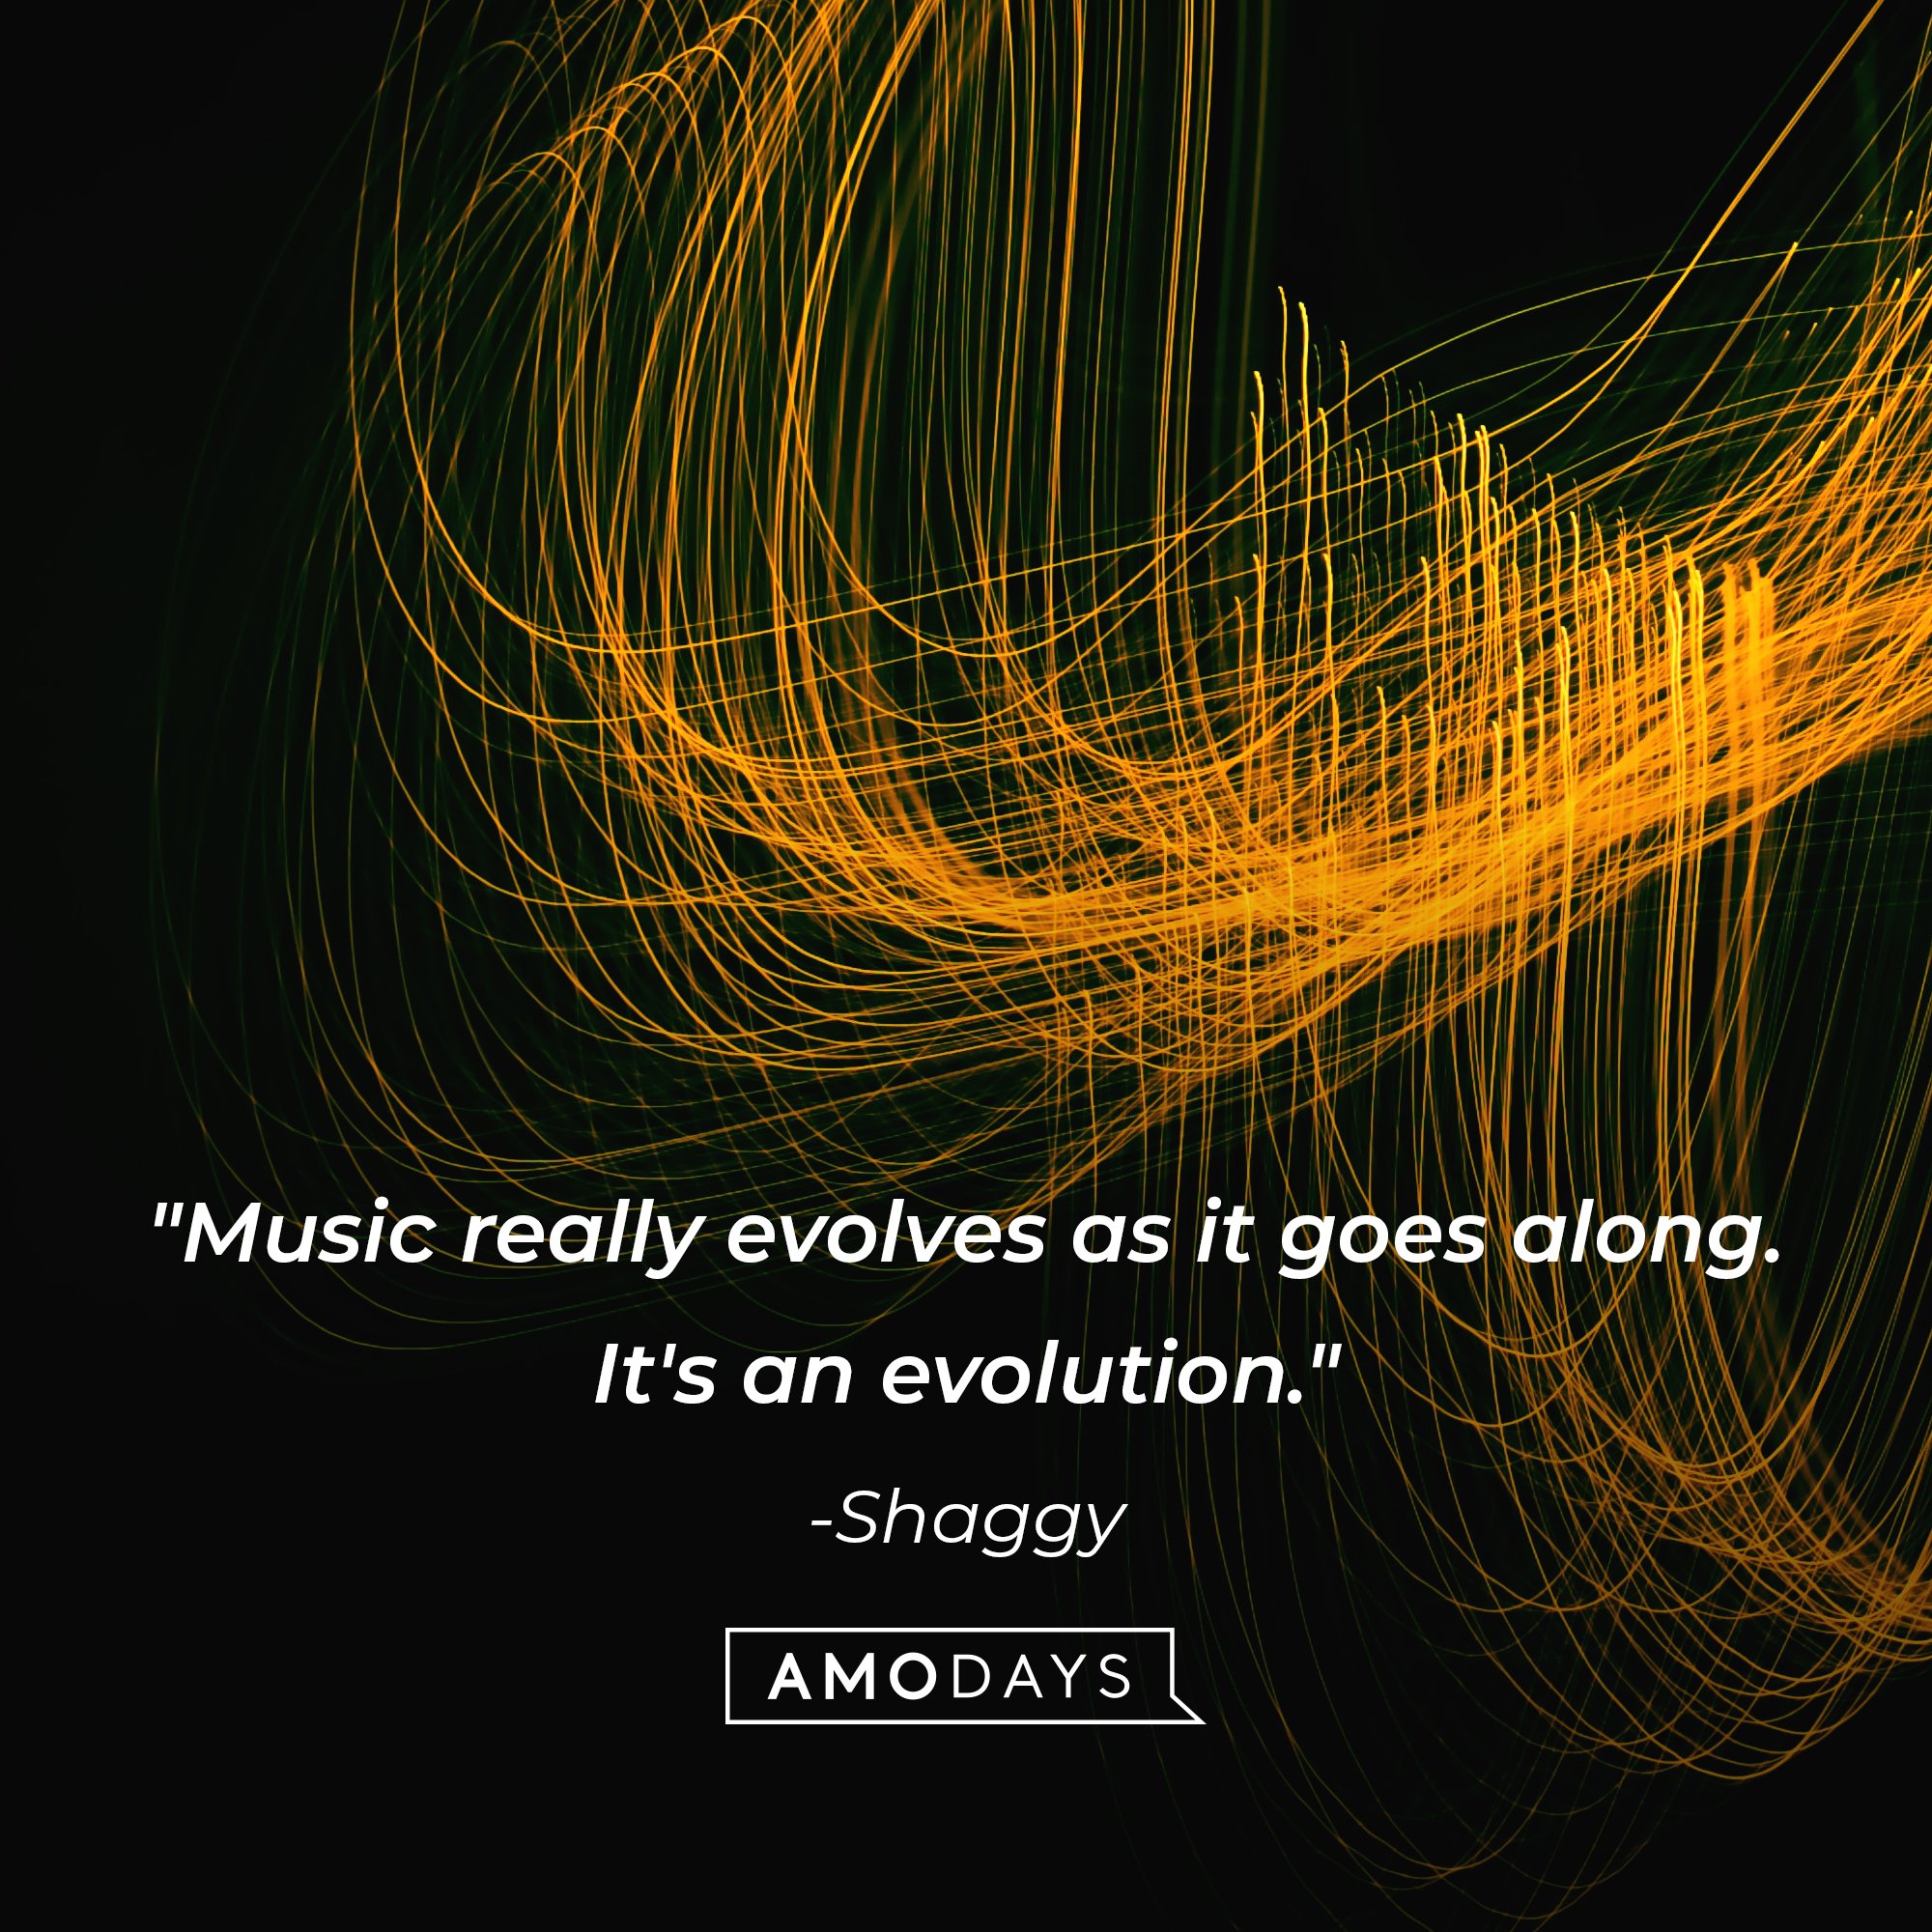 Shaggy's quote: "Music really evolves as it goes along. It's an evolution." | Image: AmoDays